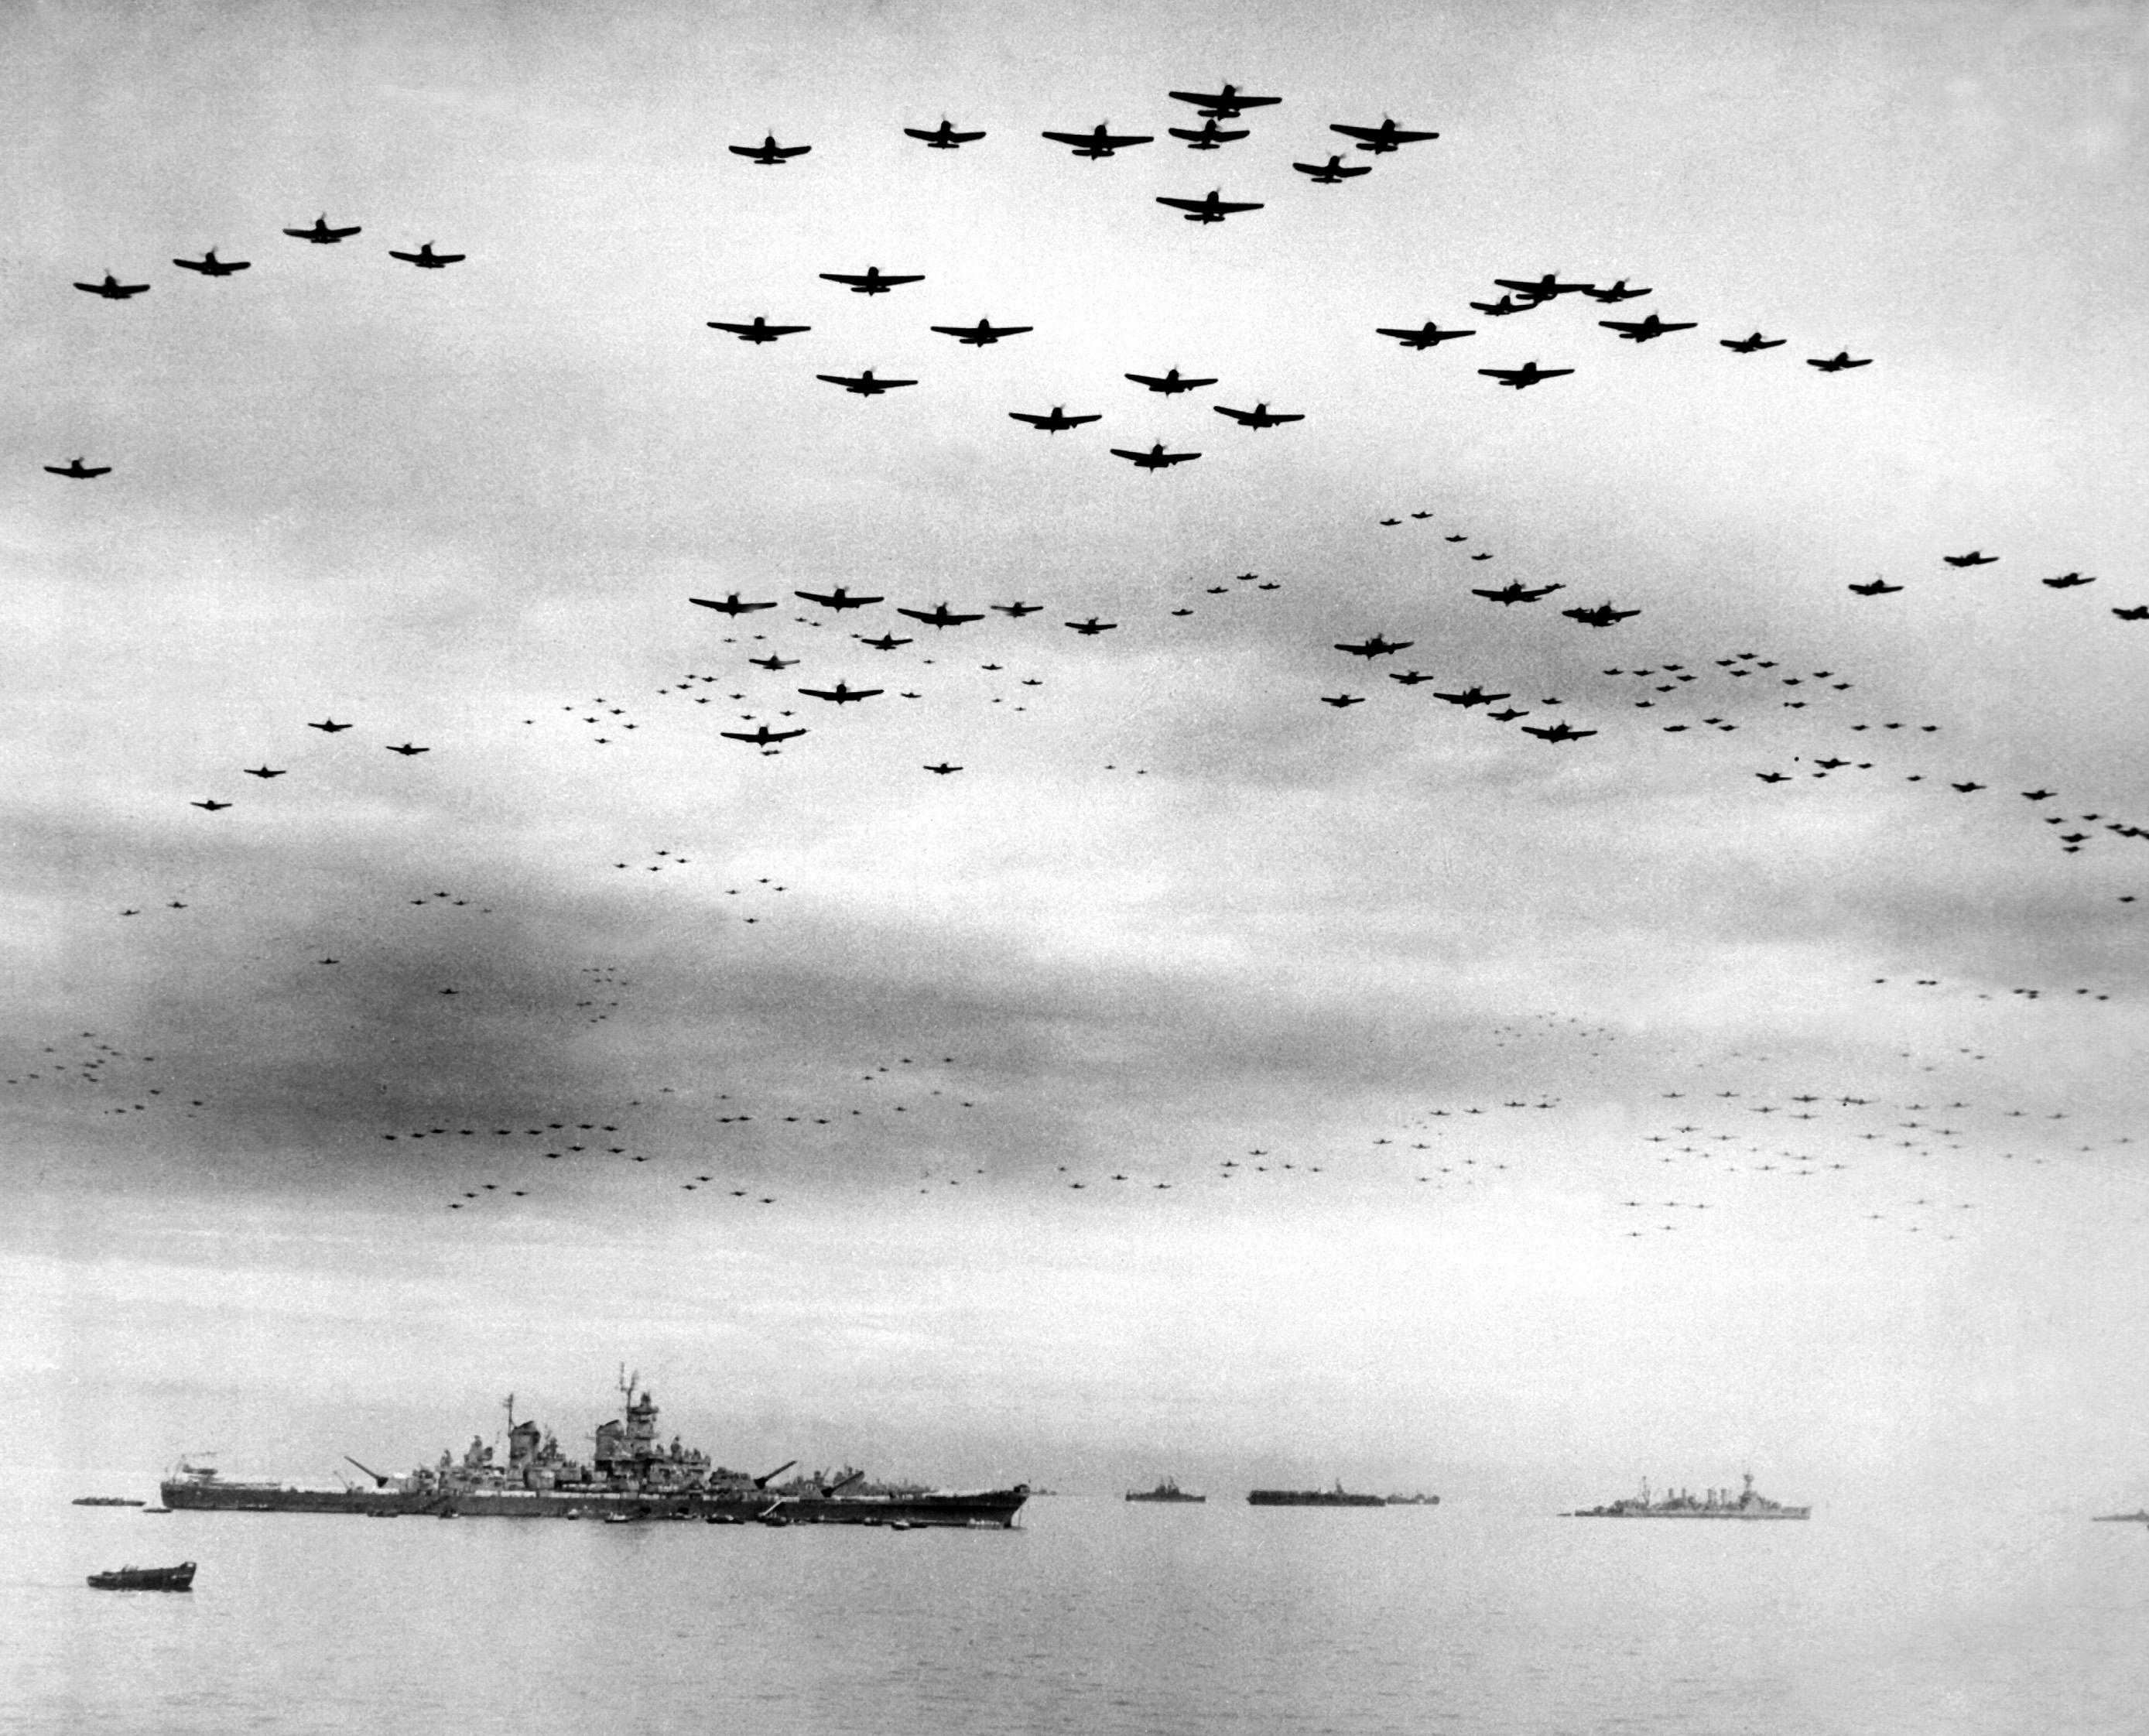 The massed flyover of Allied aircraft over Tokyo Bay during the WWII Japanese Surrender Ceremony aboard the USS Missouri below on September 2nd, 1945. Somewhere amongst the thousand aircraft thundering overhead is TBM-3E Avenger Bu.85632, the aircraft hoping to make the 70th anniversary flyover of the USS Missouri where she is now based, in Pearl Harbor, Hawaii. You can help her on that mission! (photo via Wikipedia)